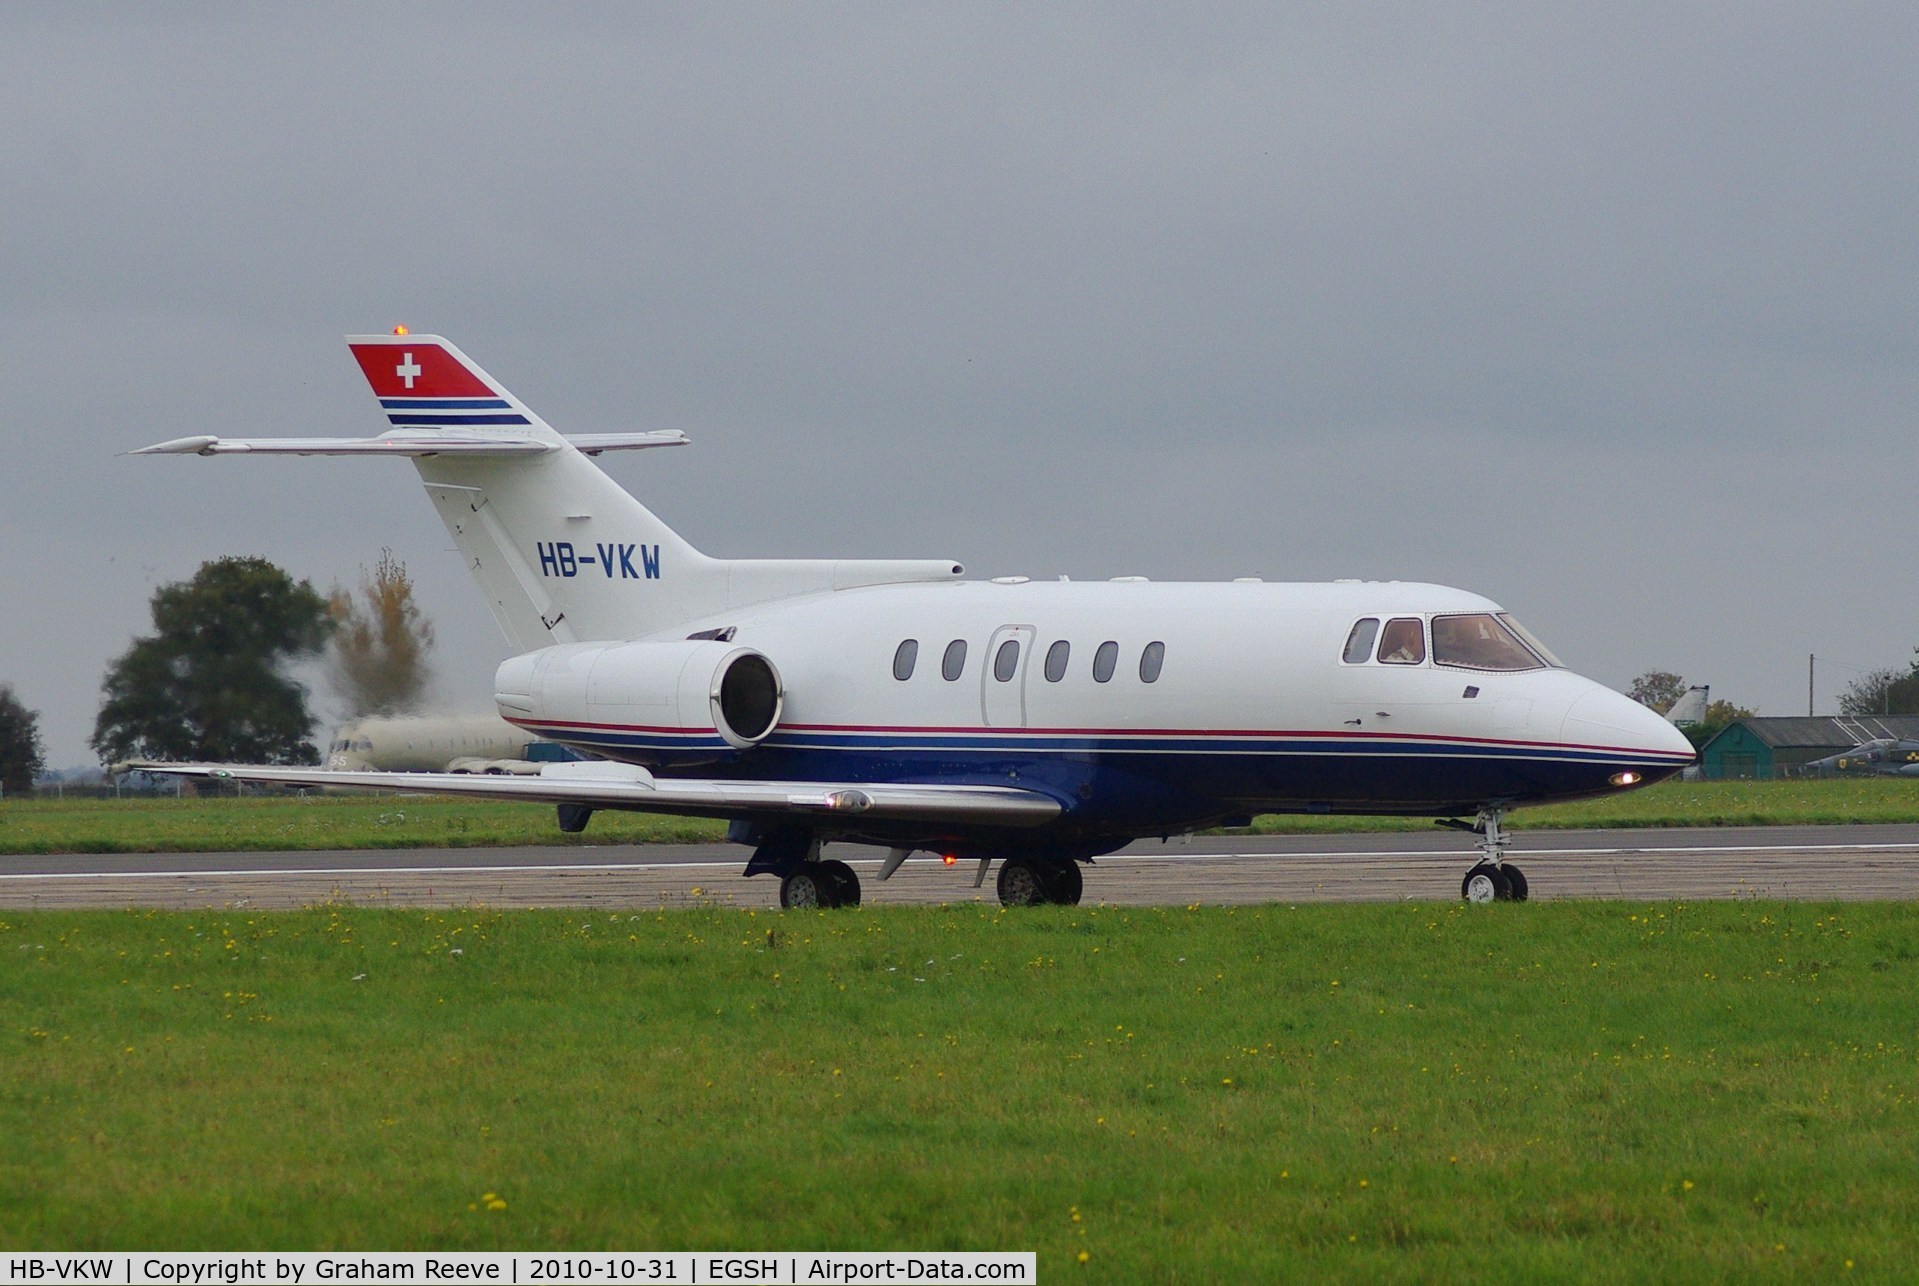 HB-VKW, 1993 Raytheon Hawker 125-800A C/N 258246, Taxing in.